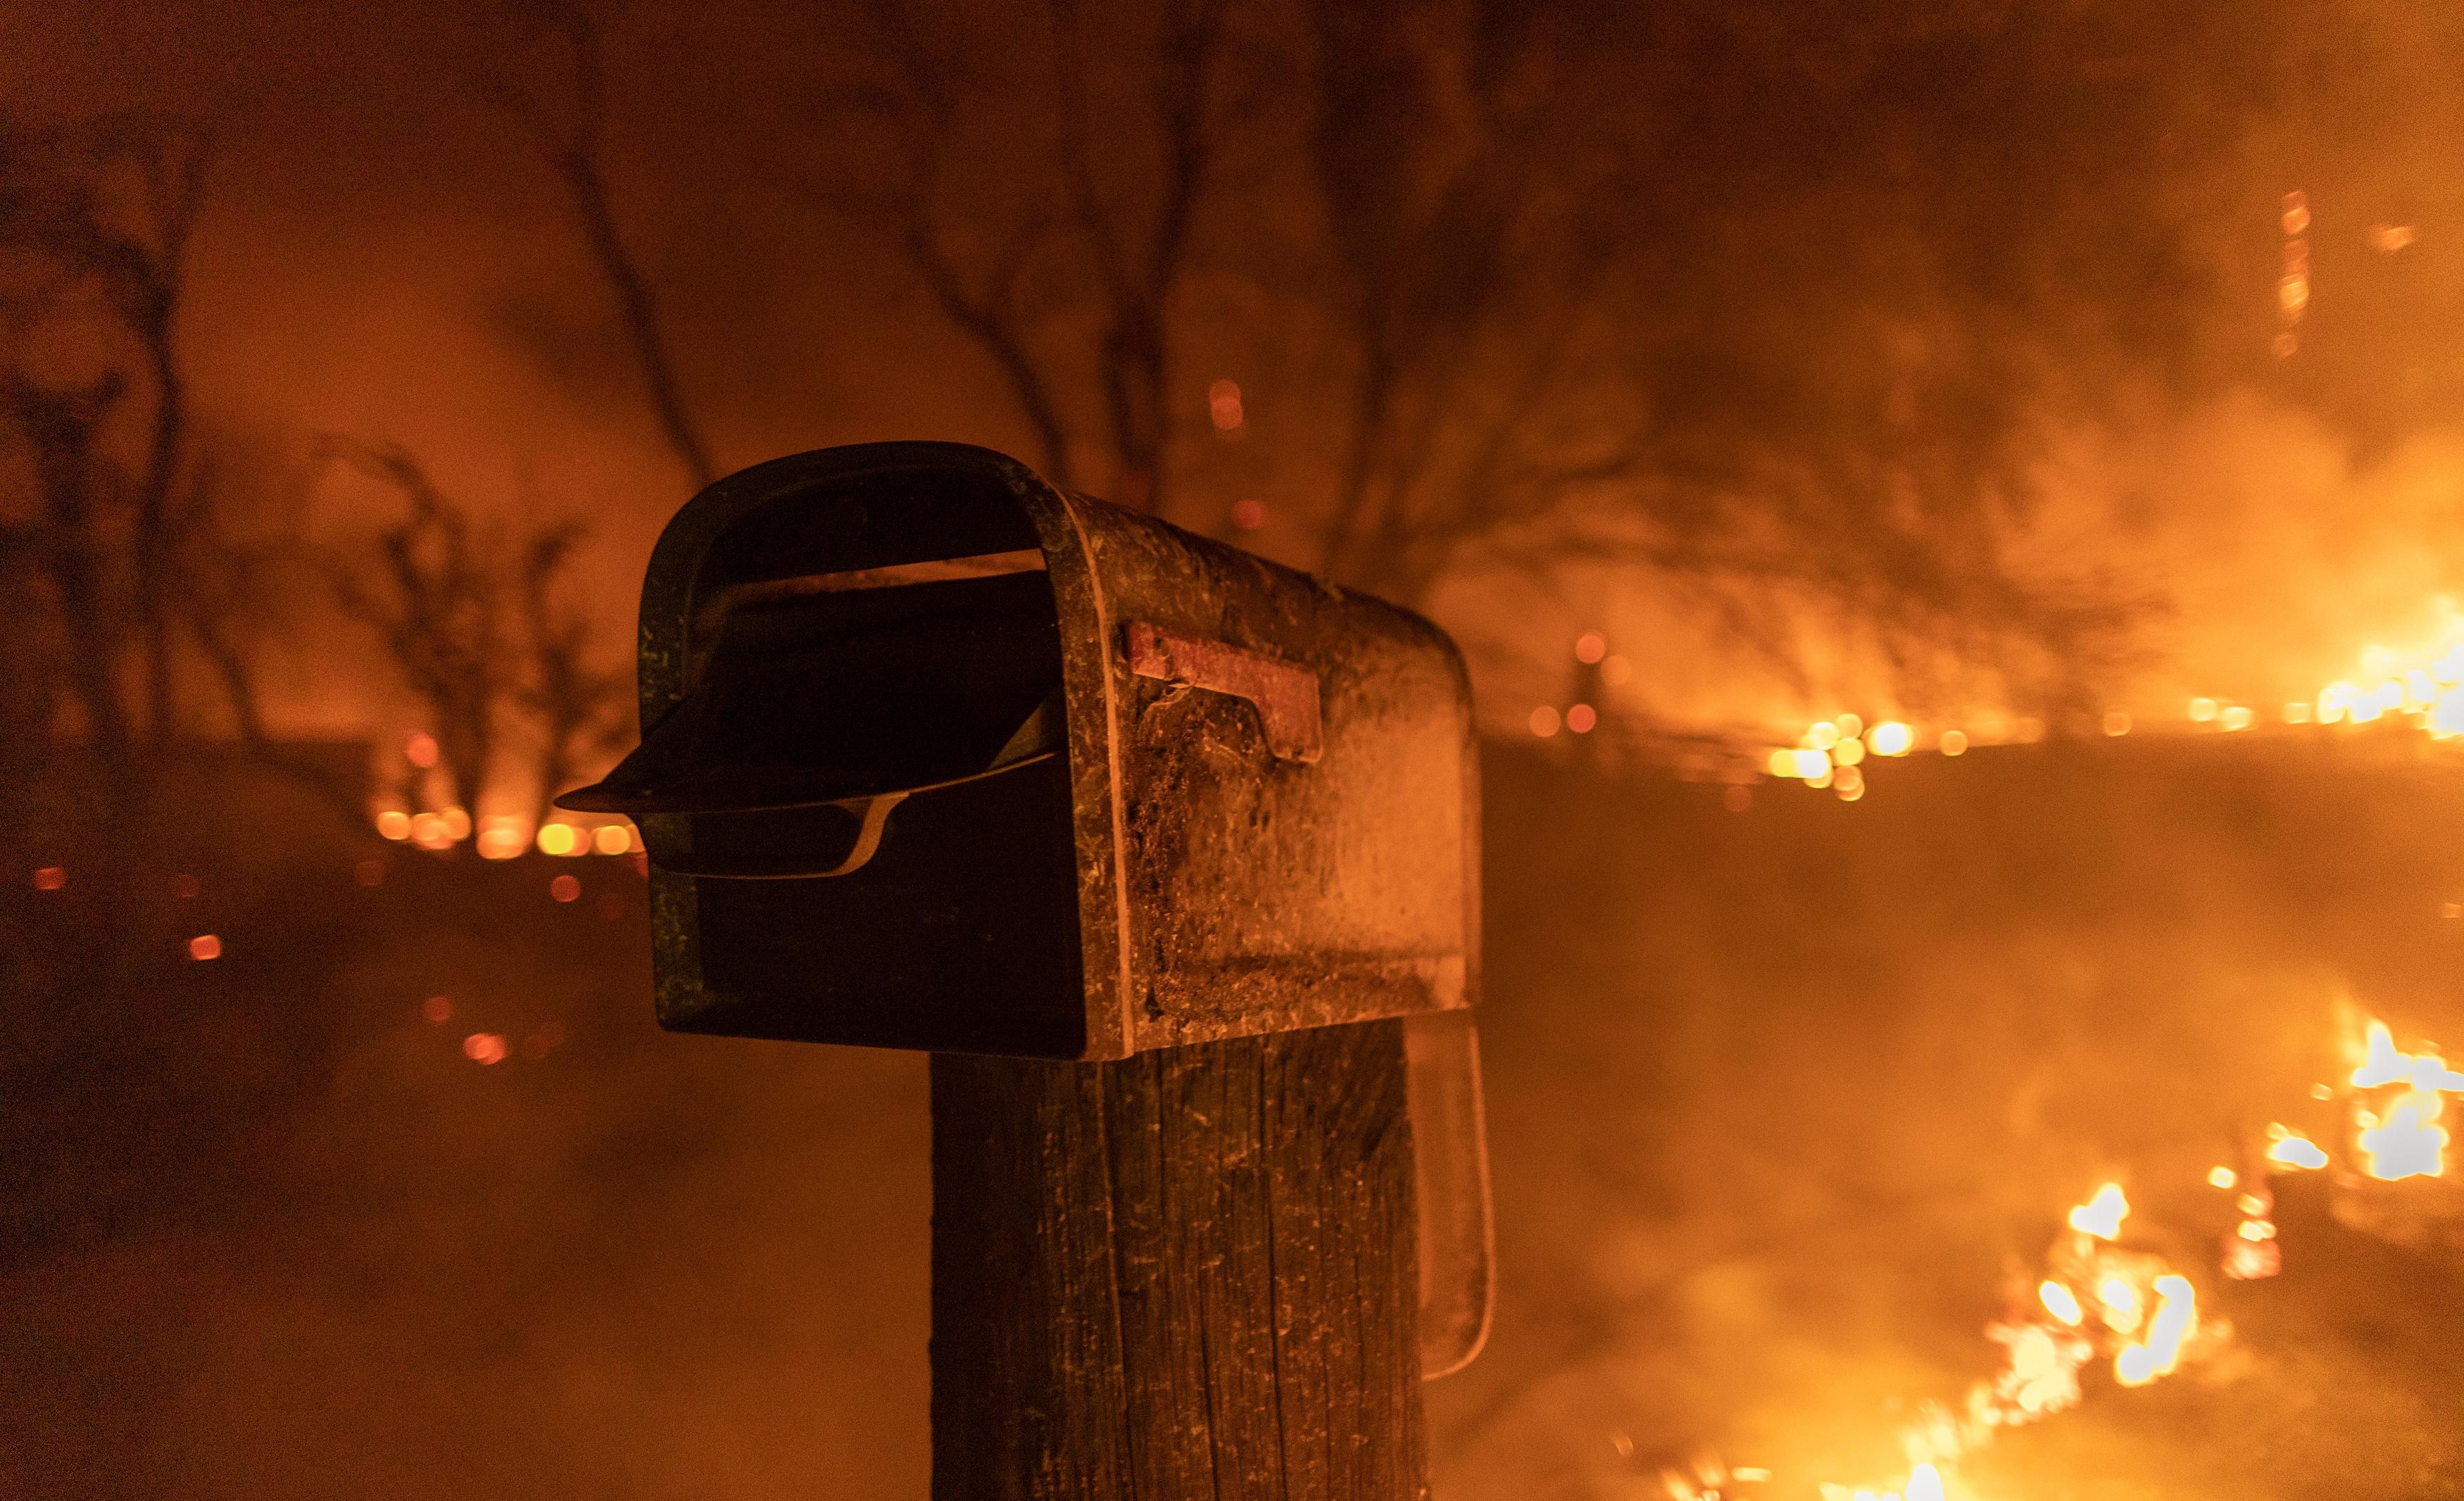 Mailbox standing as the fires burn